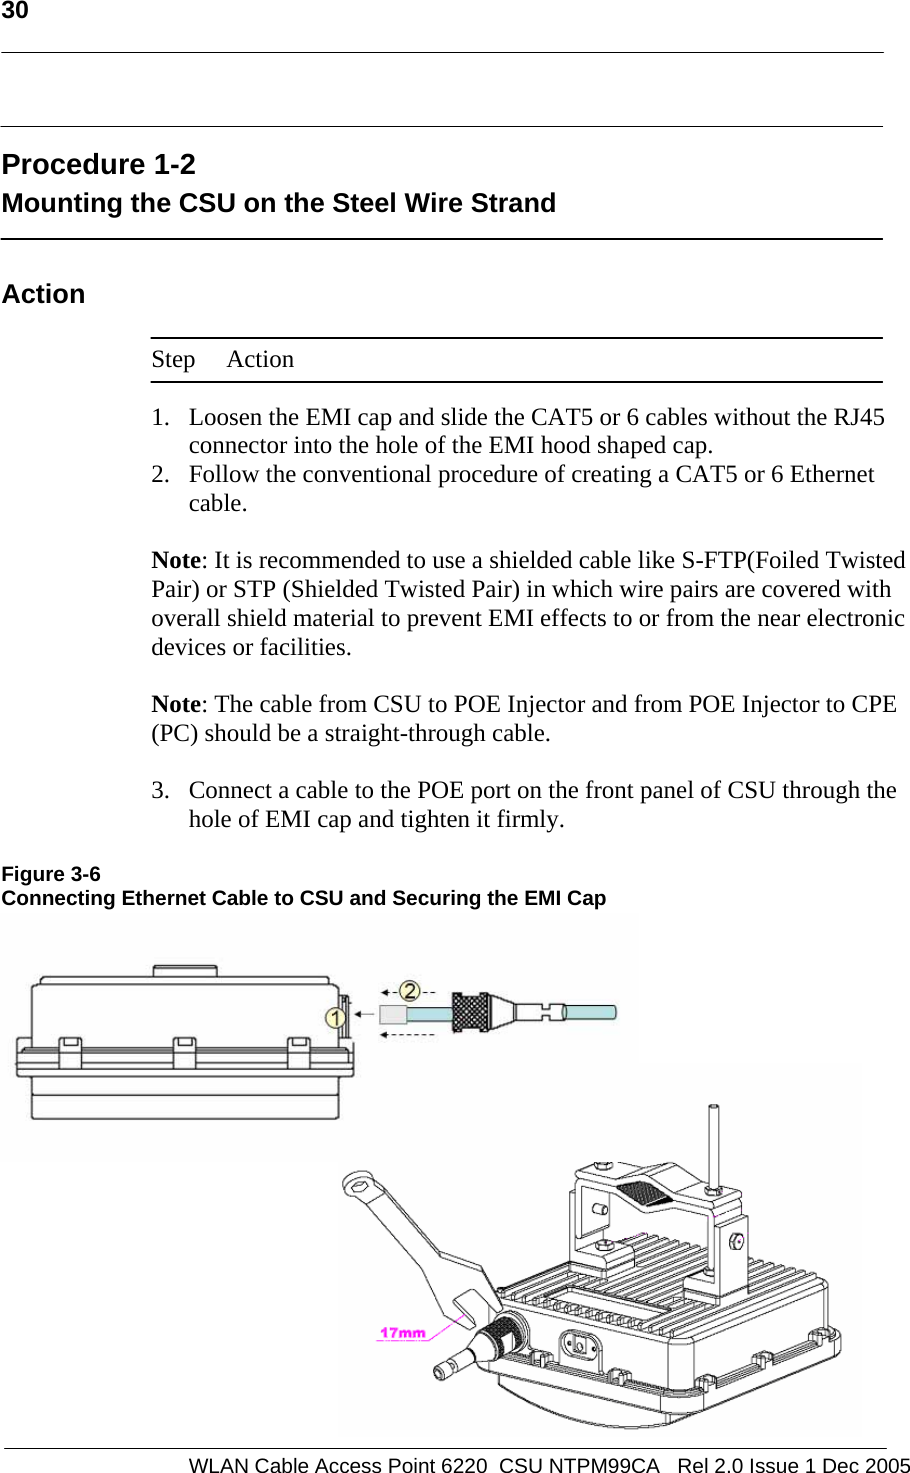   30    WLAN Cable Access Point 6220  CSU NTPM99CA   Rel 2.0 Issue 1 Dec 2005  Procedure 1-2 Mounting the CSU on the Steel Wire Strand  Action  Step Action  1. Loosen the EMI cap and slide the CAT5 or 6 cables without the RJ45 connector into the hole of the EMI hood shaped cap. 2. Follow the conventional procedure of creating a CAT5 or 6 Ethernet cable.  Note: It is recommended to use a shielded cable like S-FTP(Foiled Twisted Pair) or STP (Shielded Twisted Pair) in which wire pairs are covered with overall shield material to prevent EMI effects to or from the near electronic devices or facilities.    Note: The cable from CSU to POE Injector and from POE Injector to CPE (PC) should be a straight-through cable.   3. Connect a cable to the POE port on the front panel of CSU through the hole of EMI cap and tighten it firmly.  Figure 3-6 Connecting Ethernet Cable to CSU and Securing the EMI Cap           